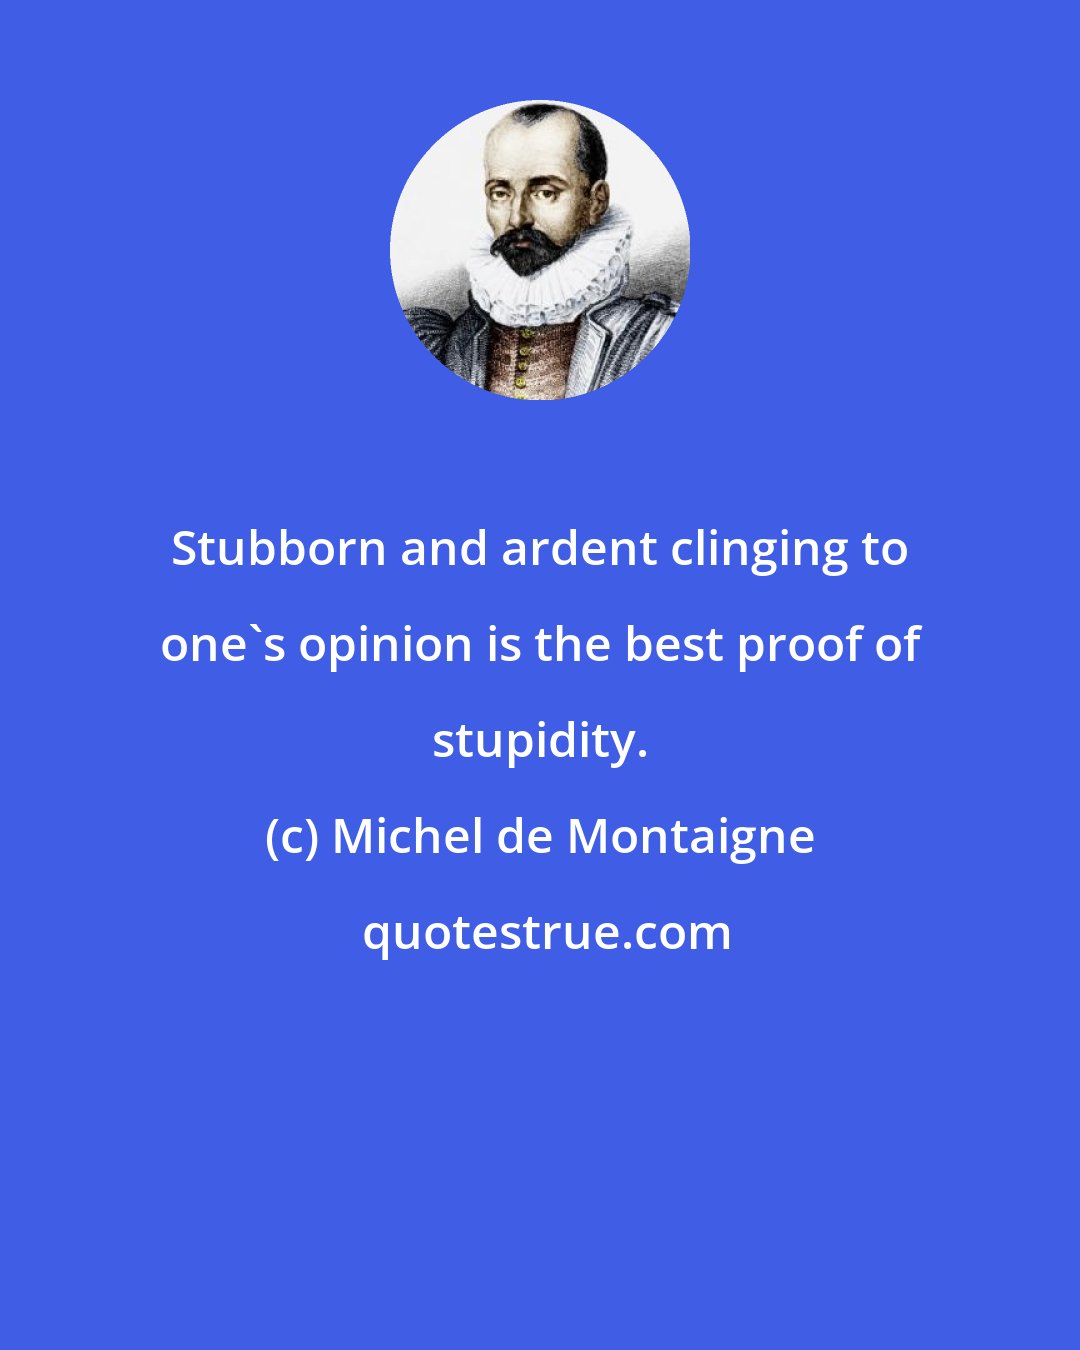 Michel de Montaigne: Stubborn and ardent clinging to one's opinion is the best proof of stupidity.